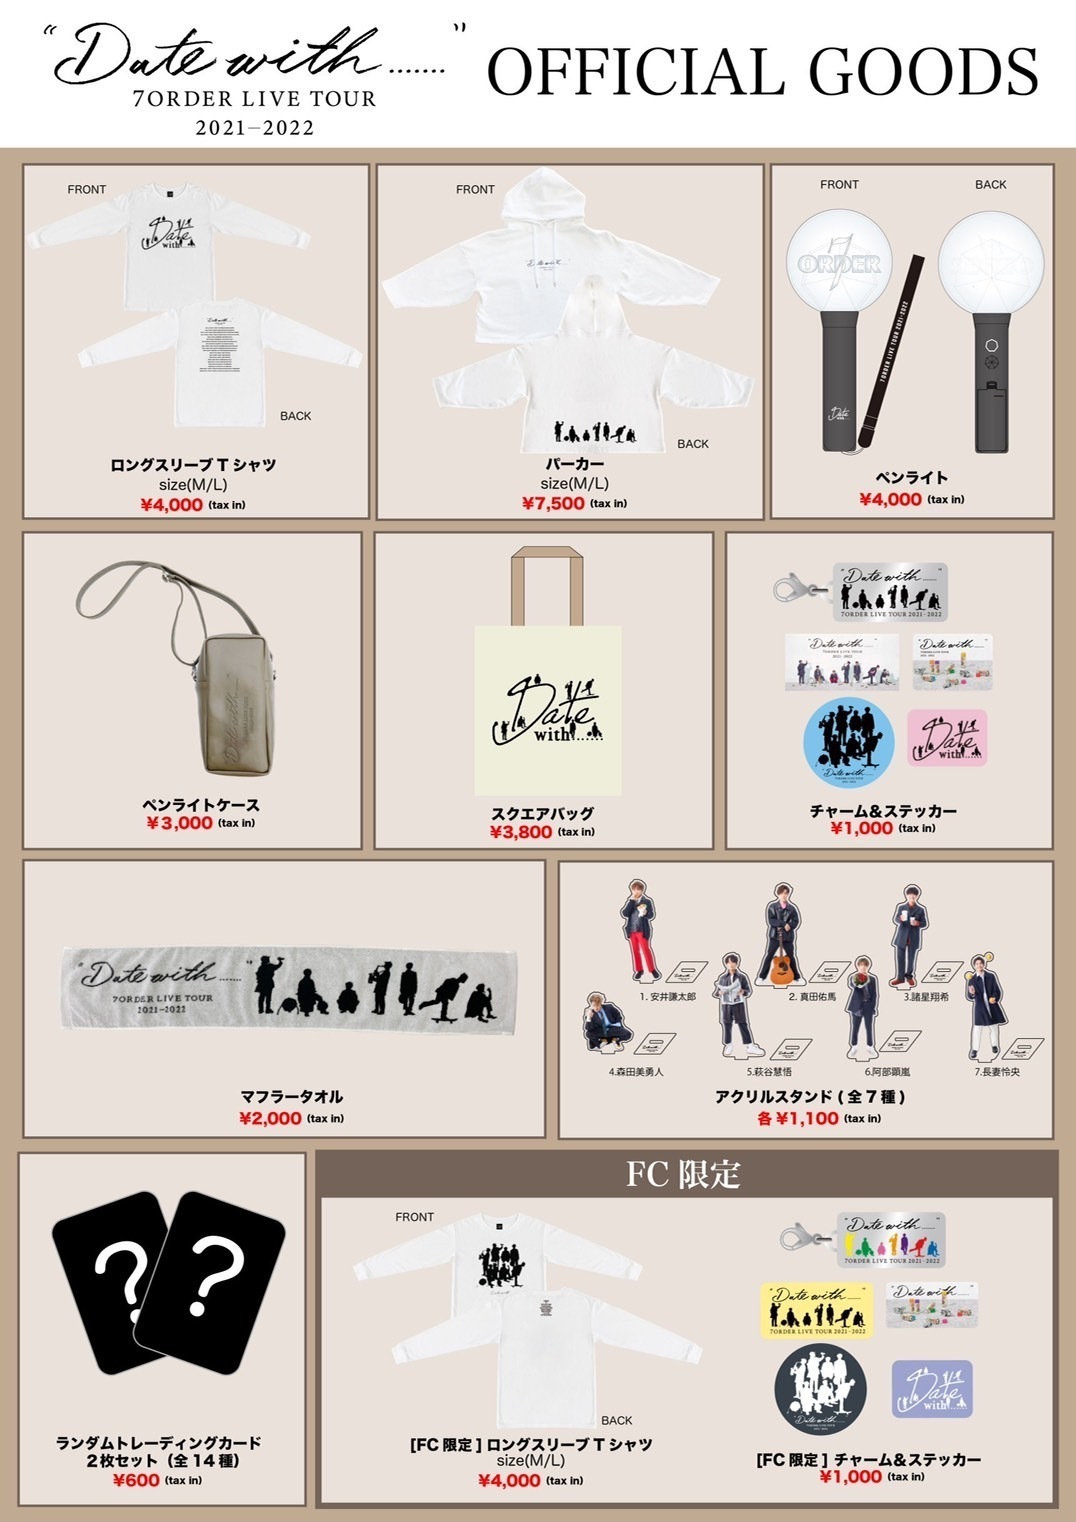 Date with.......」ツアーグッズ解禁 | 7ORDER project Official Site